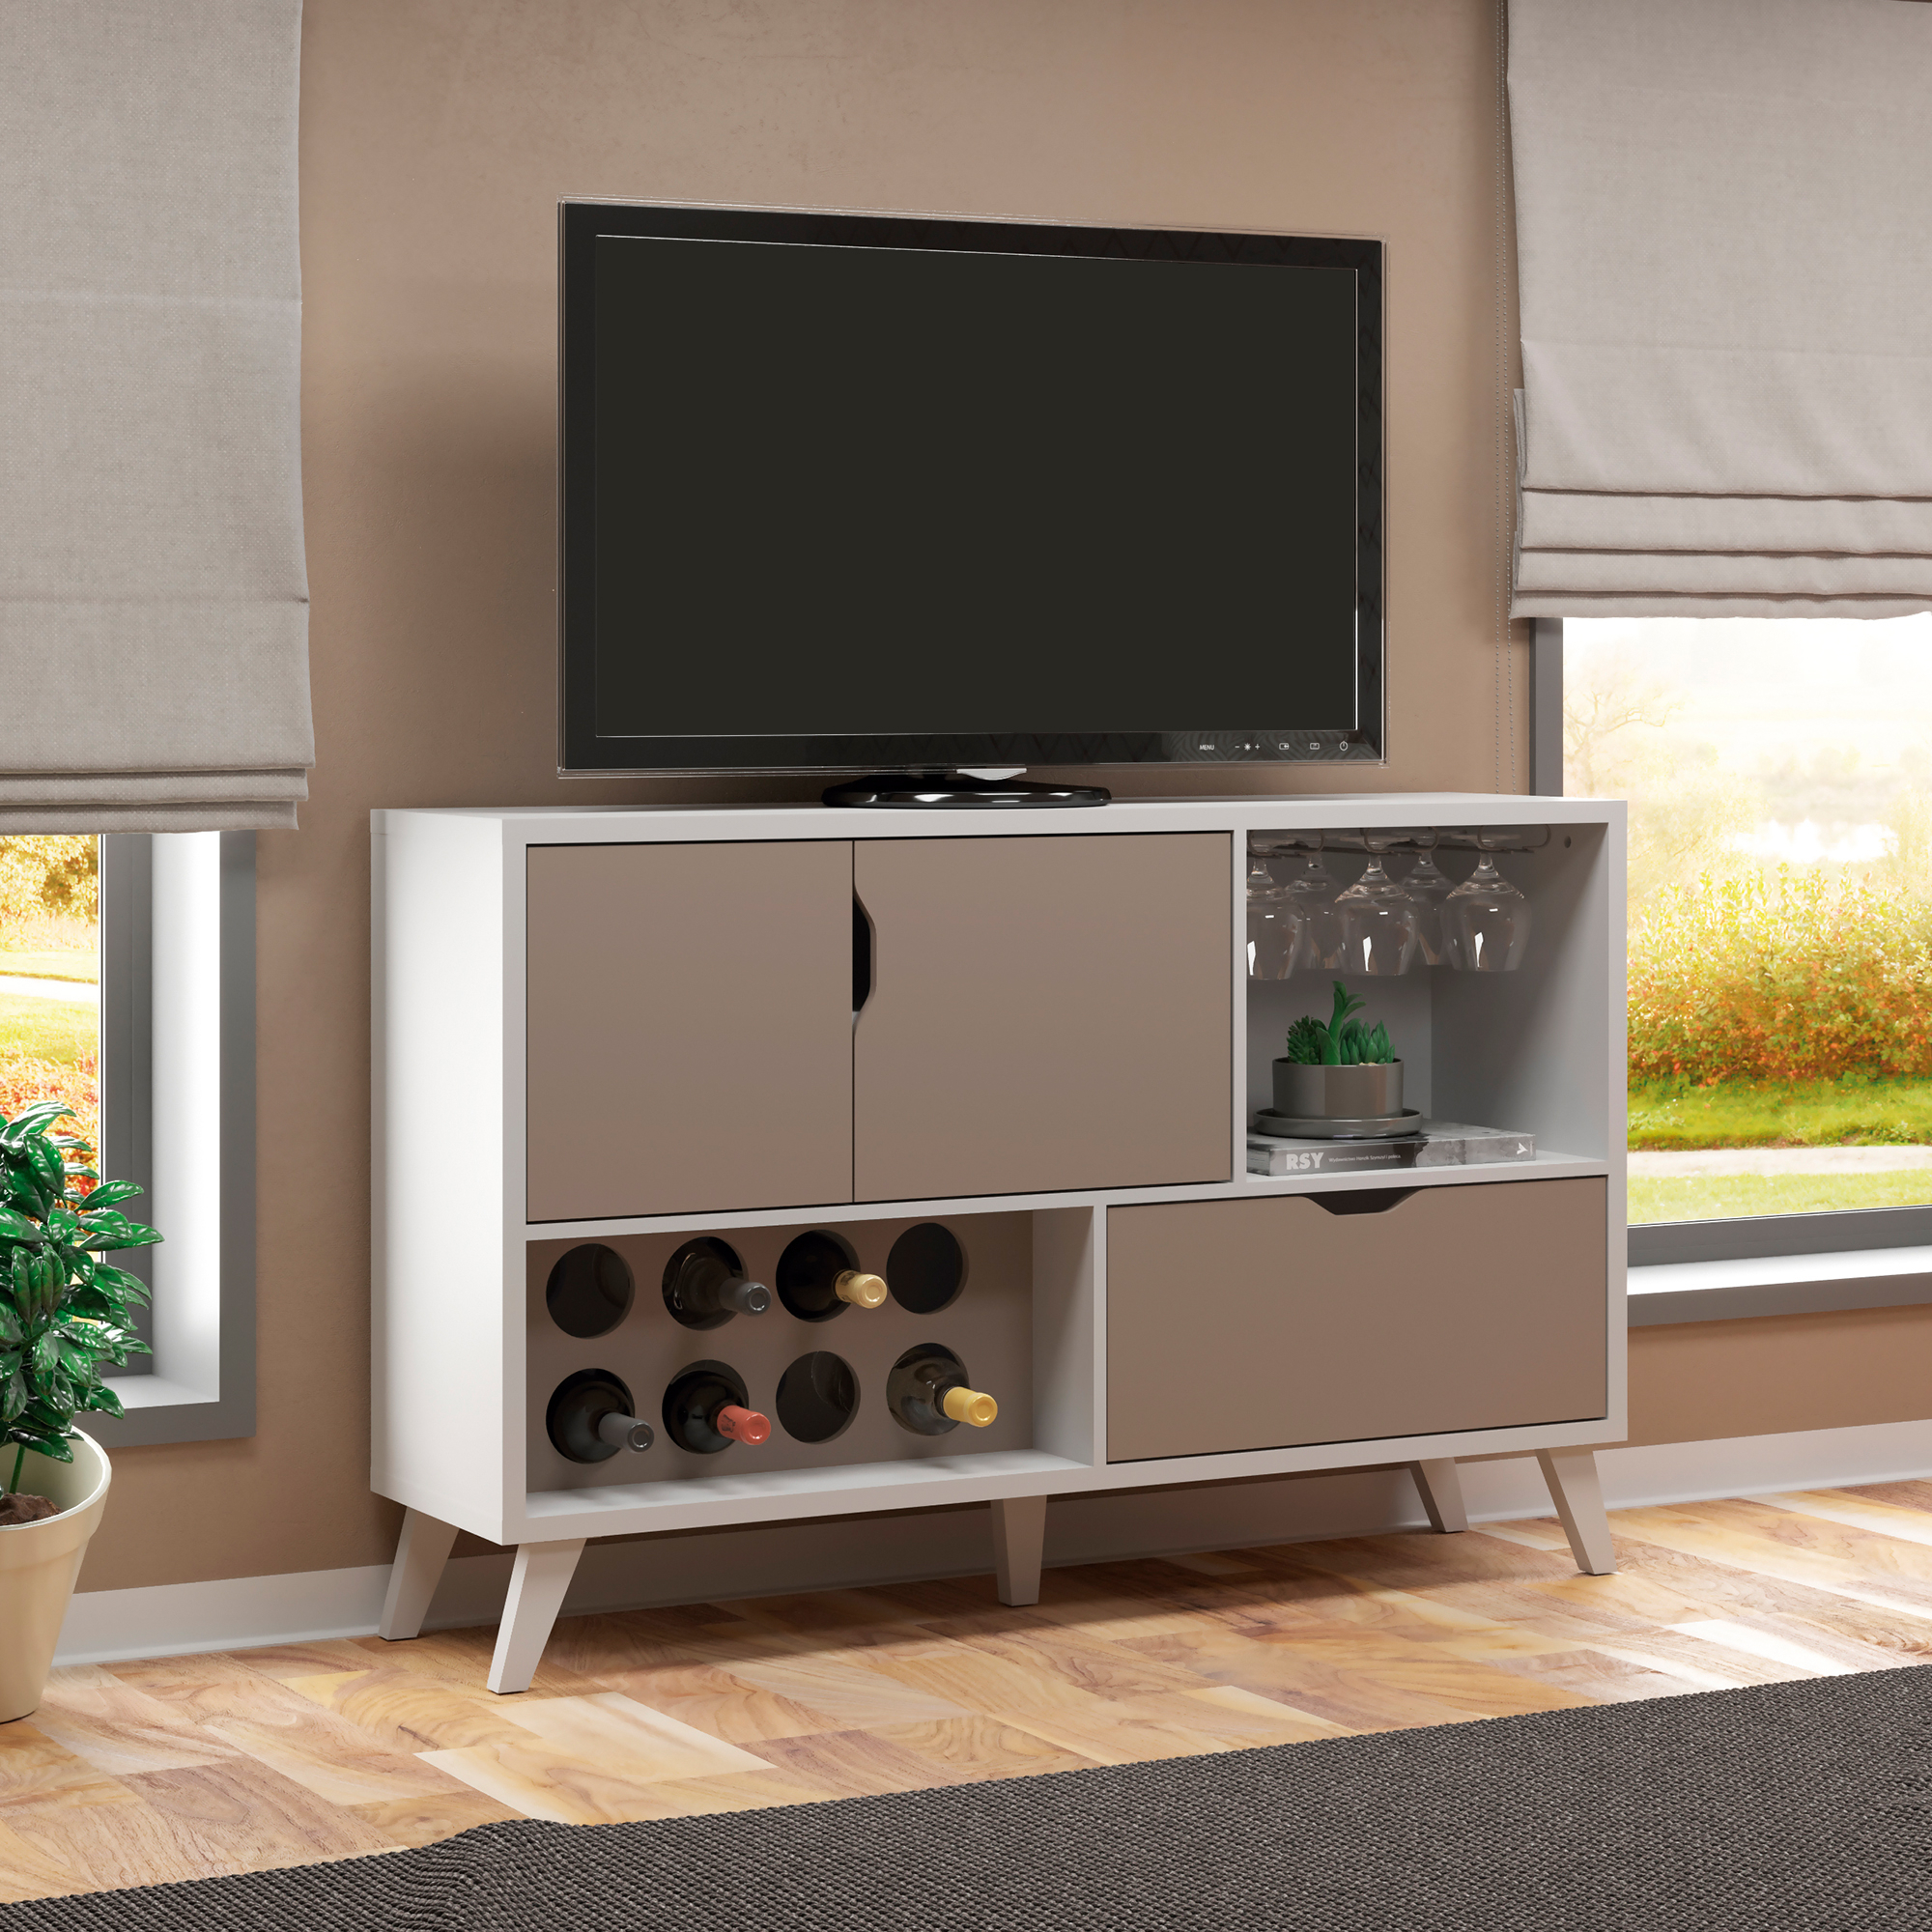 54 Inch 2 Door Wooden TV Stand With Wine Rack And 1 Drawer, White And Gray, Saltoro Sherpi